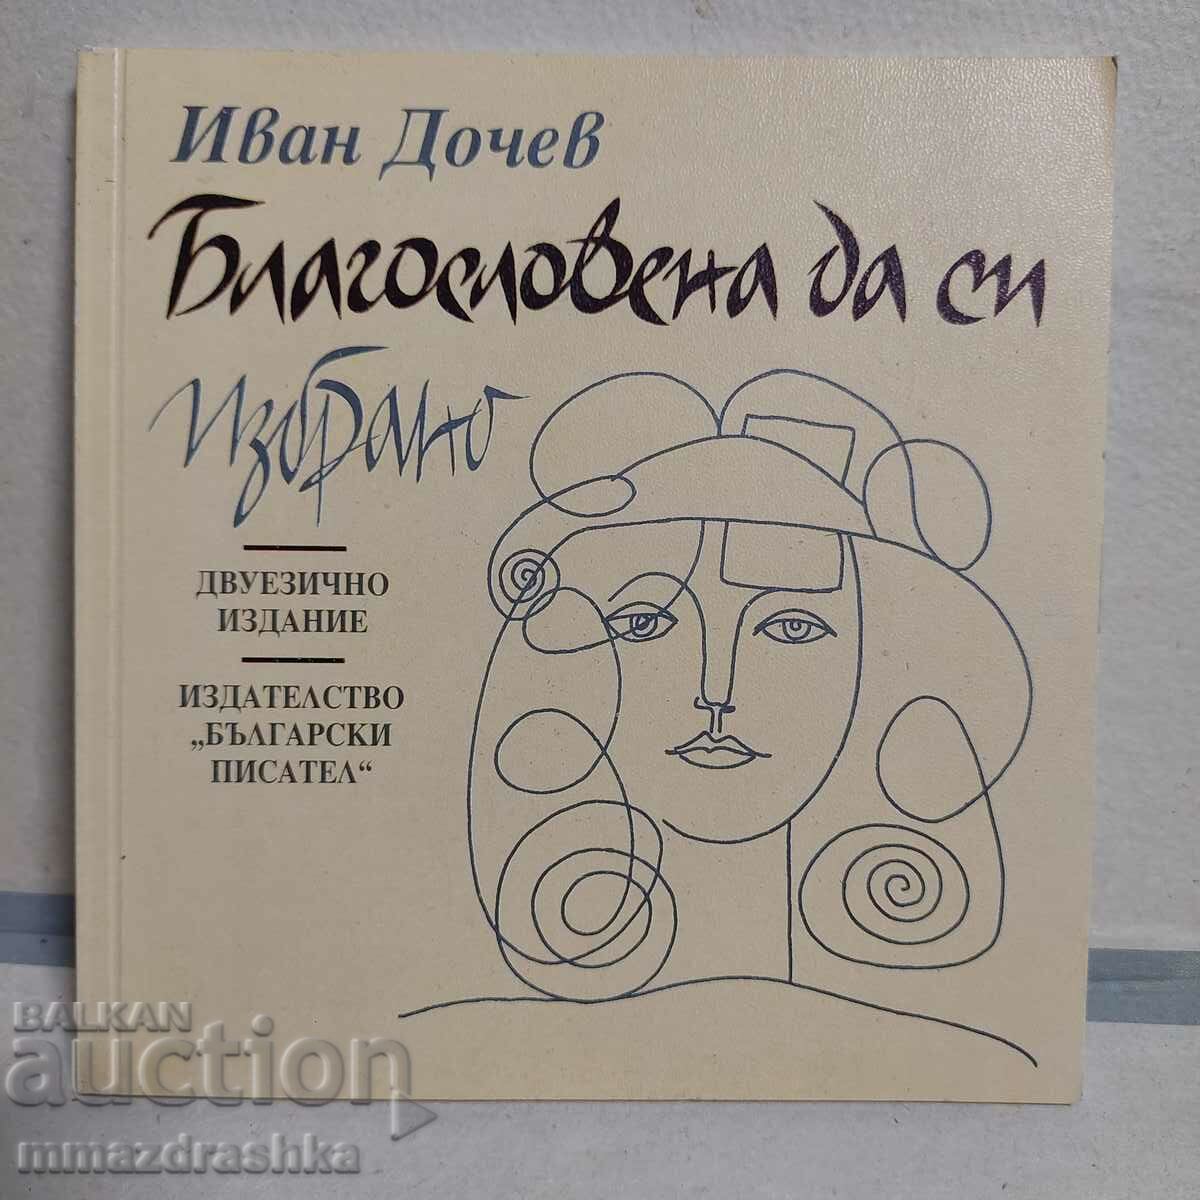 Autographed! Blessed be you, Ivan Donchev